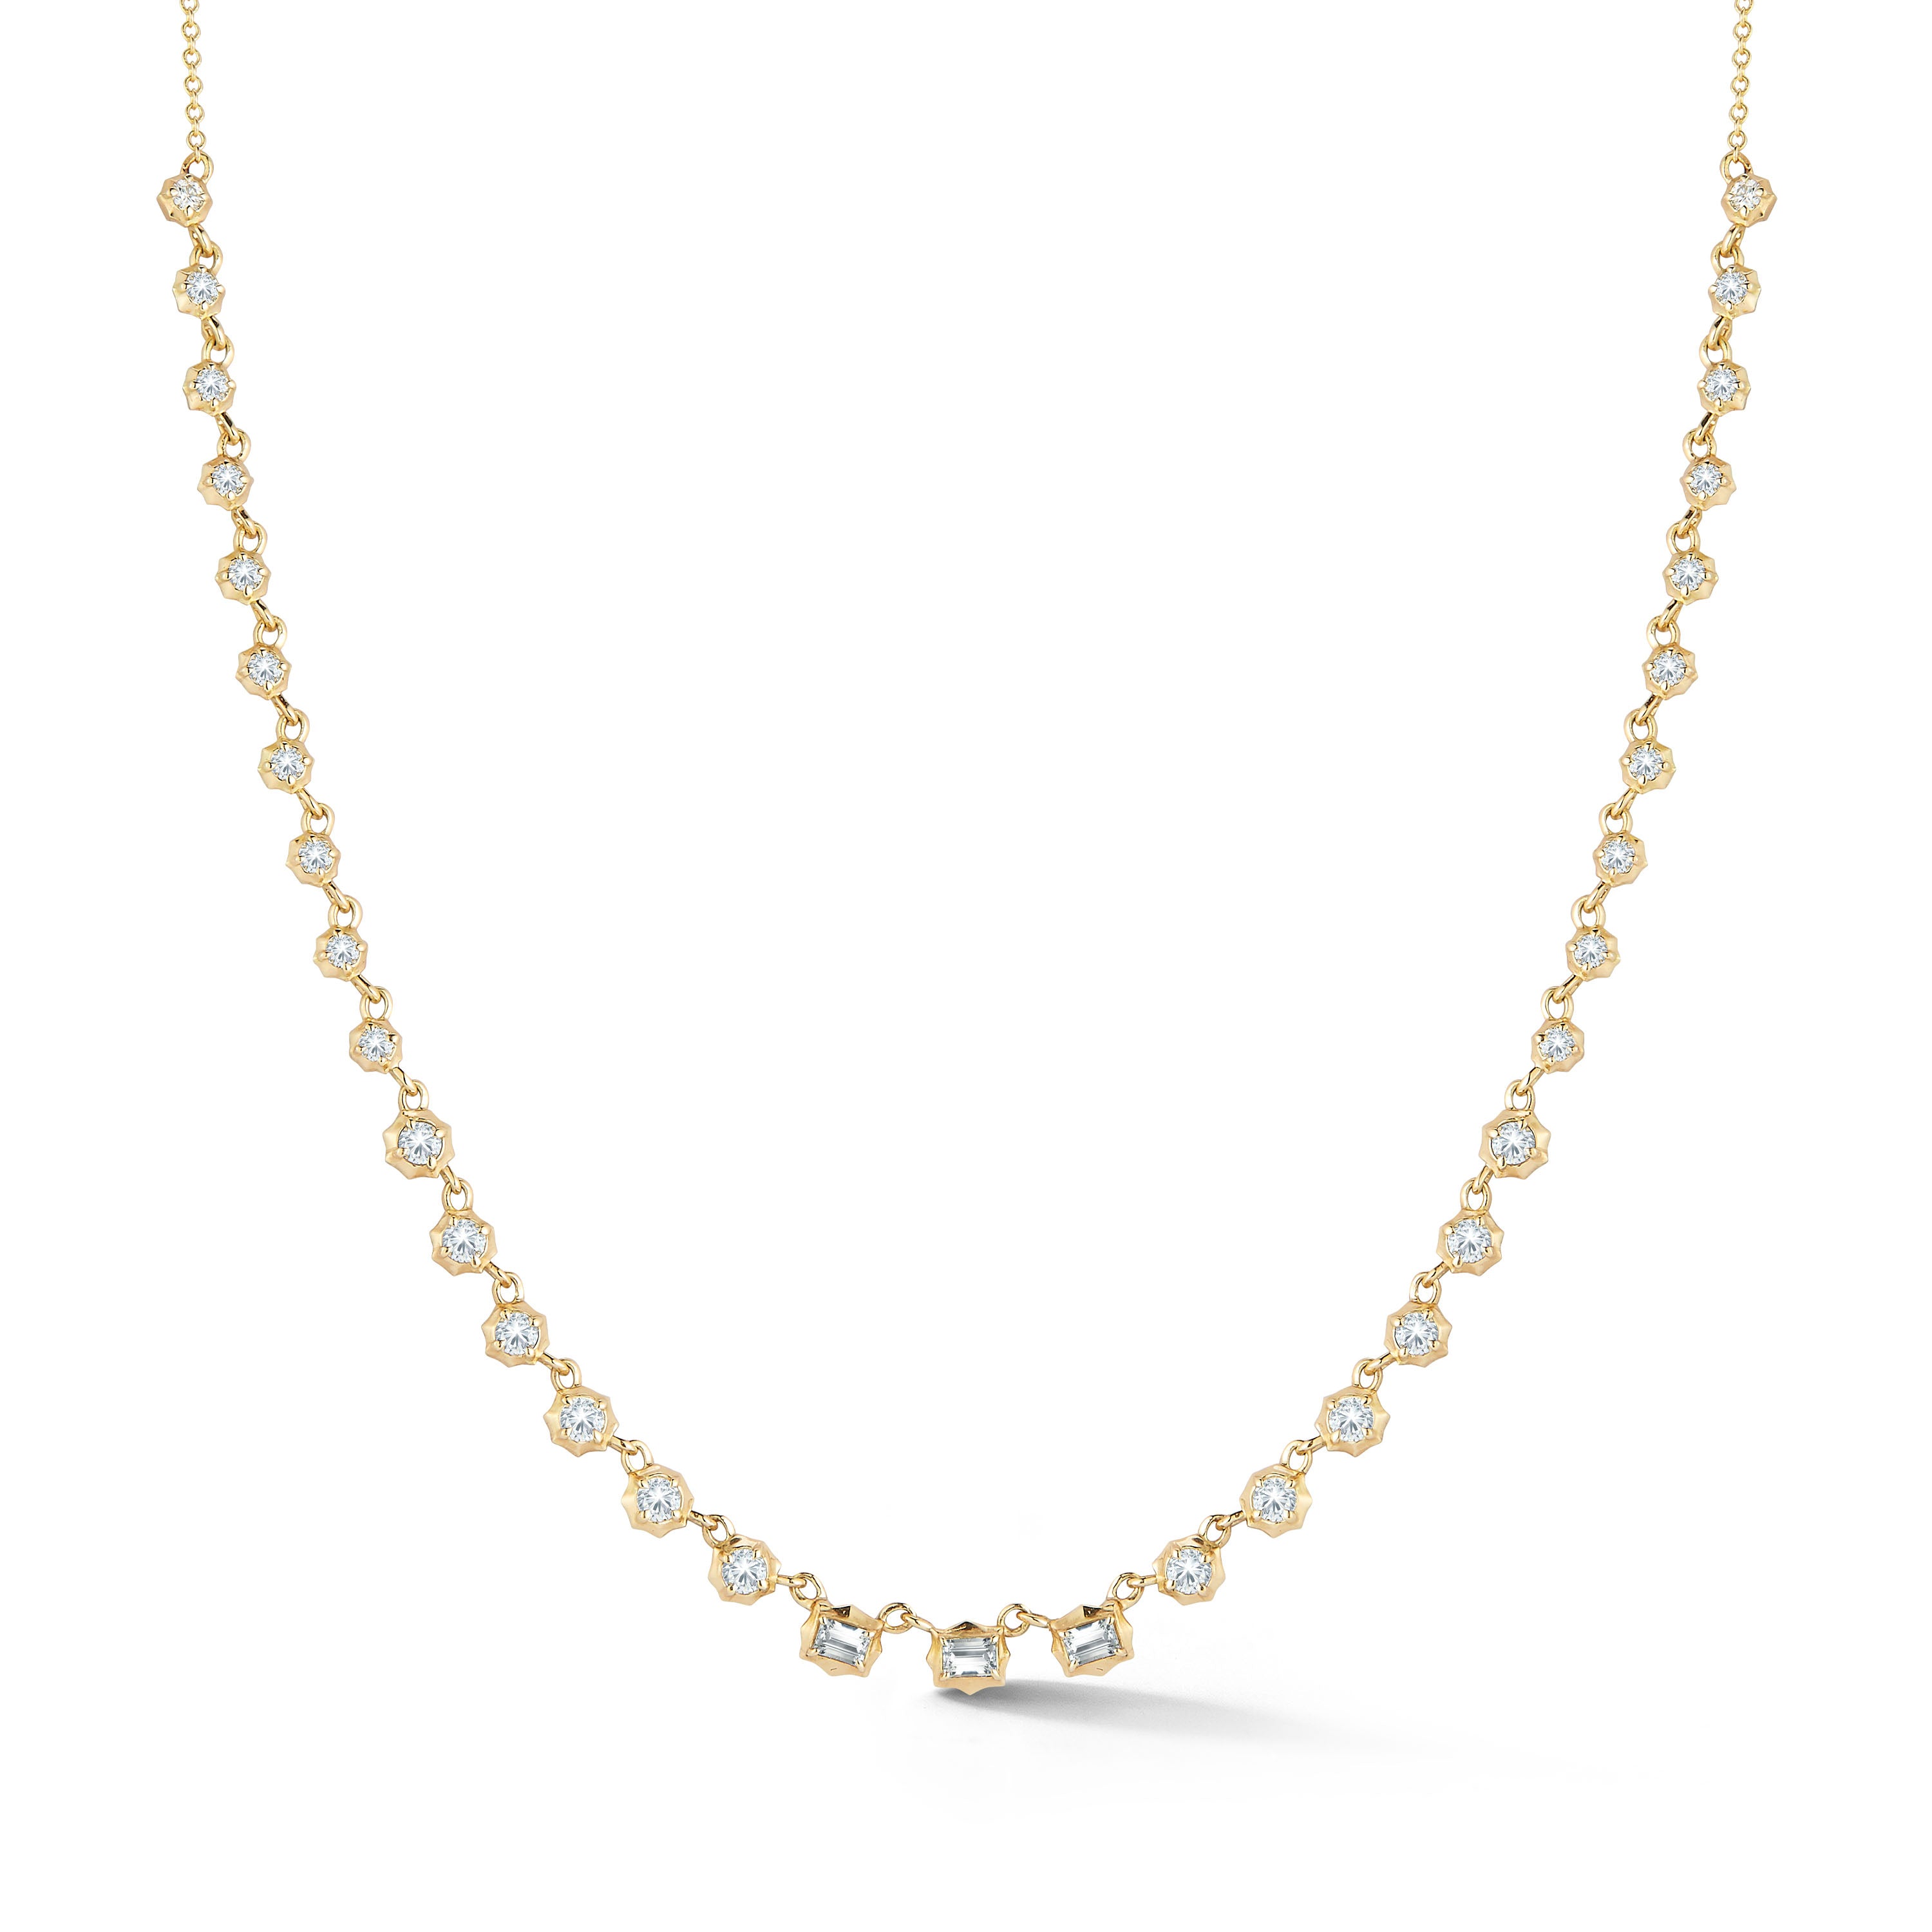 Small Vanguard Riviera Necklace in 18K Yellow Gold